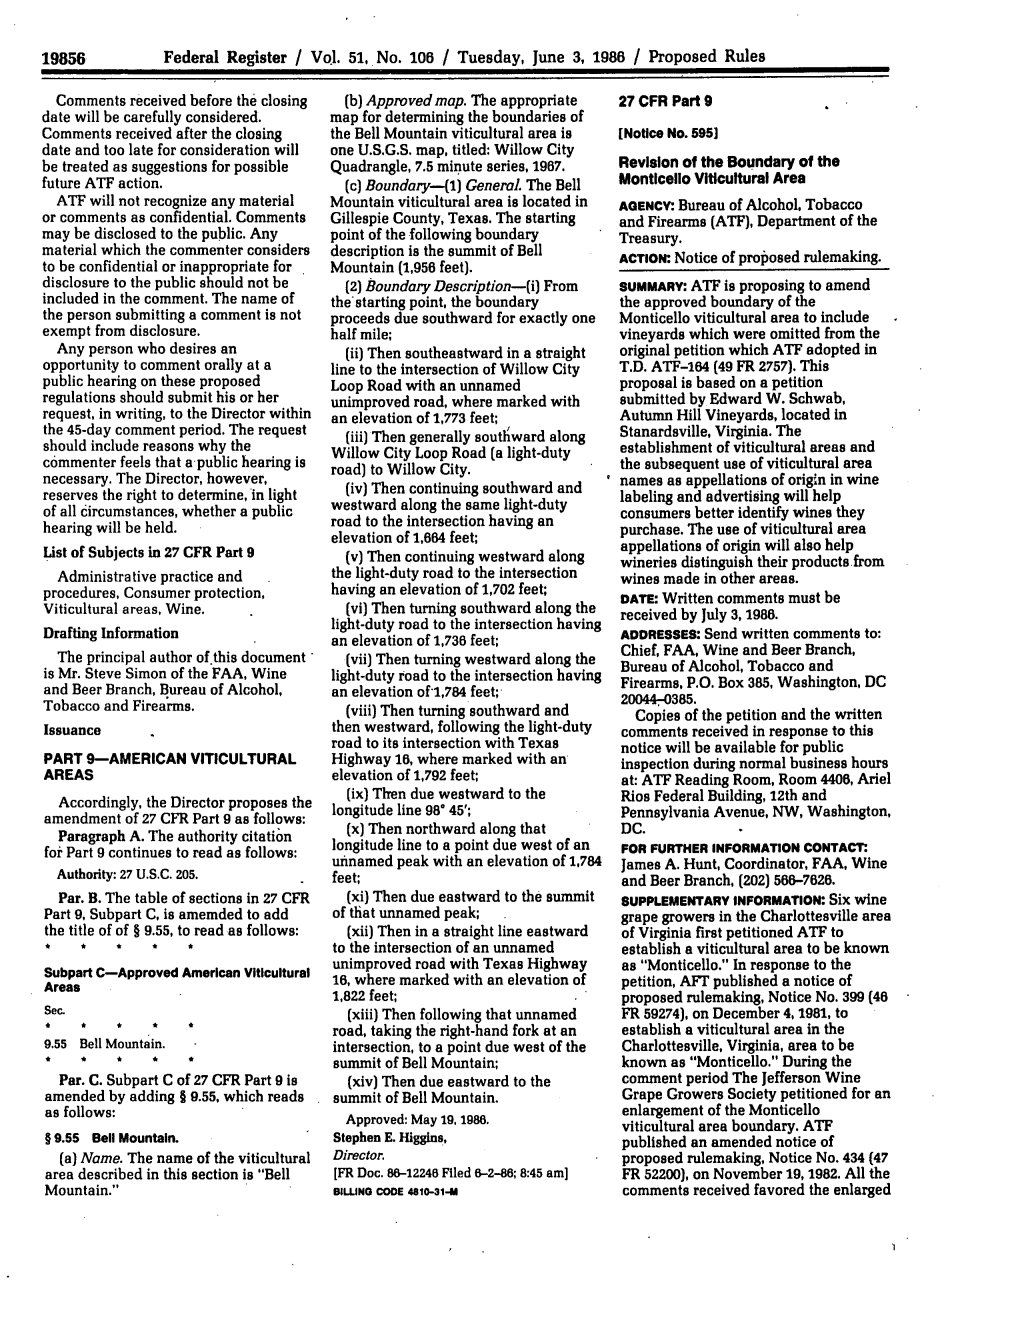 Federal Register / Vol. 51, No. 106 / Tuesday, June 3, 1986 / Proposed Rules